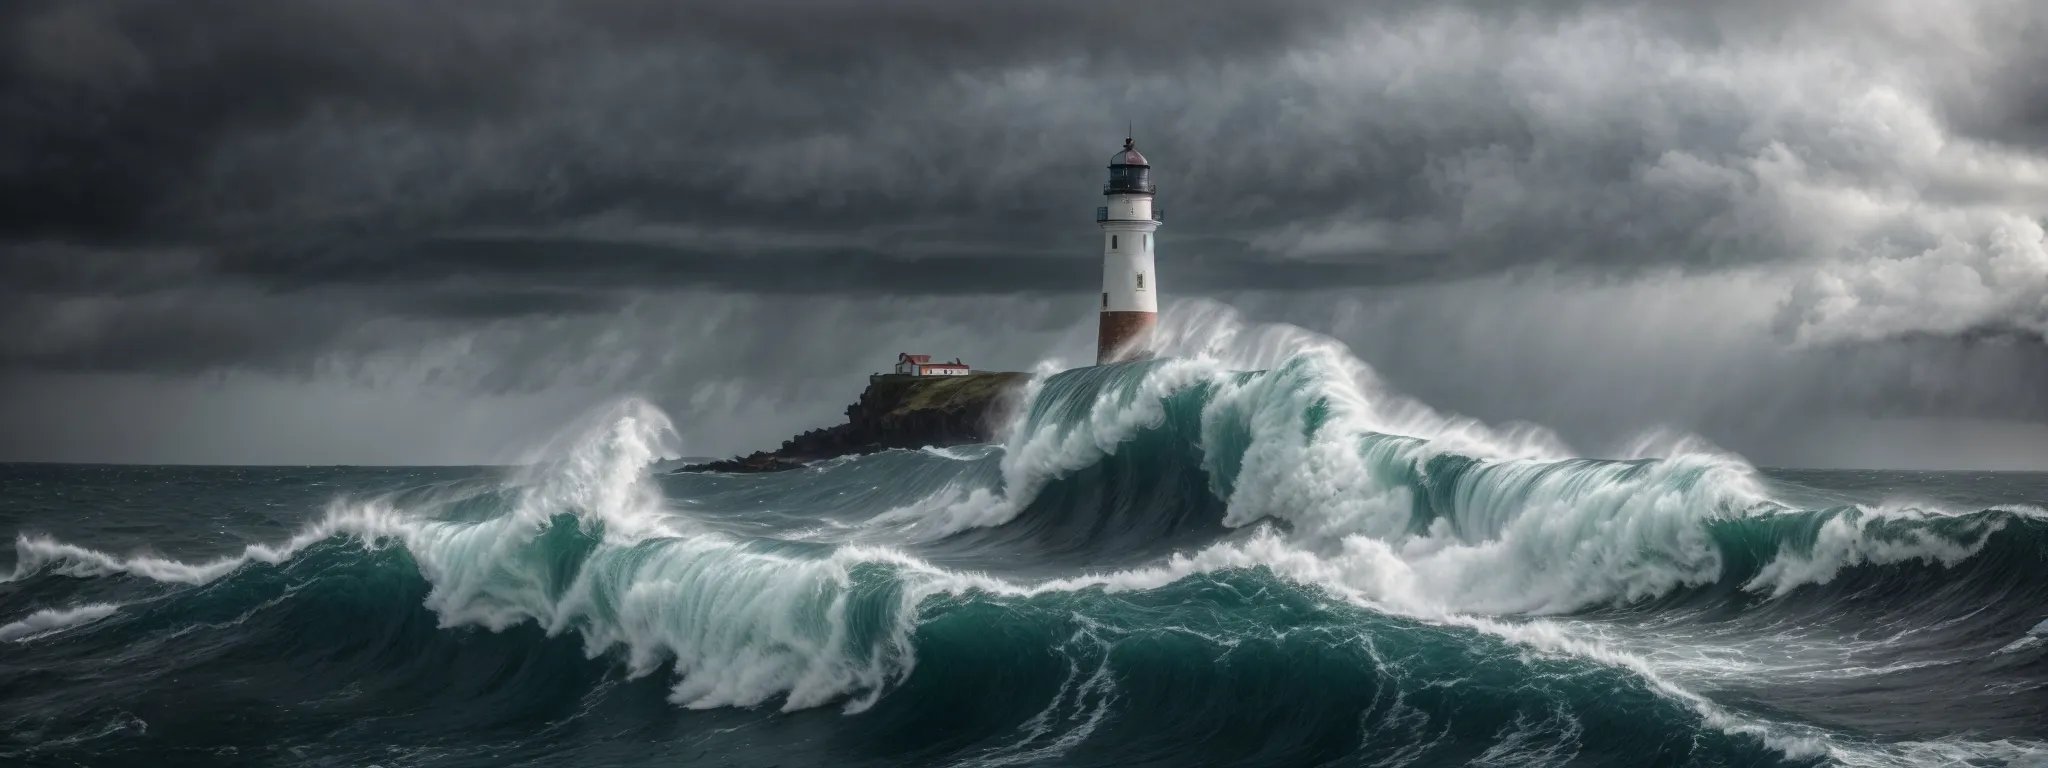 a lighthouse stands steadfast amidst turbulent ocean waves under a stormy sky, symbolizing the enduring presence of digital marketing through shifting trends.